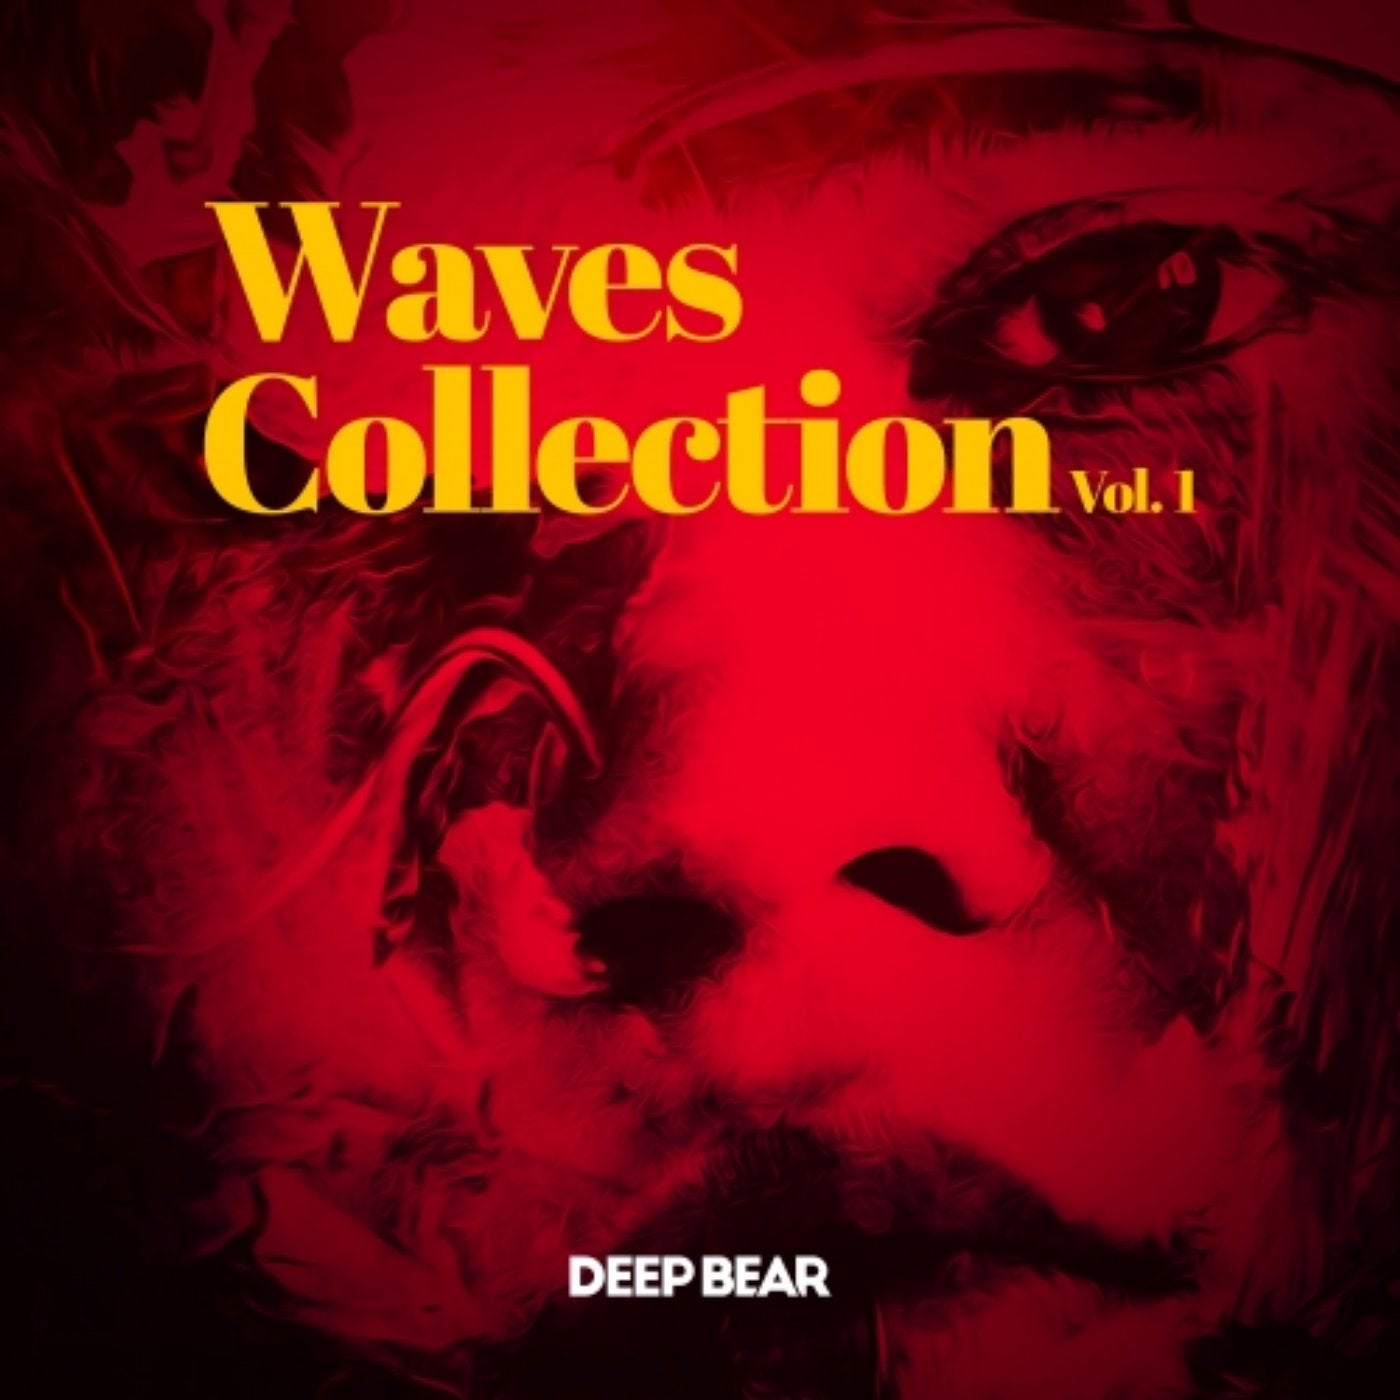 Waves Collection Vol. 1